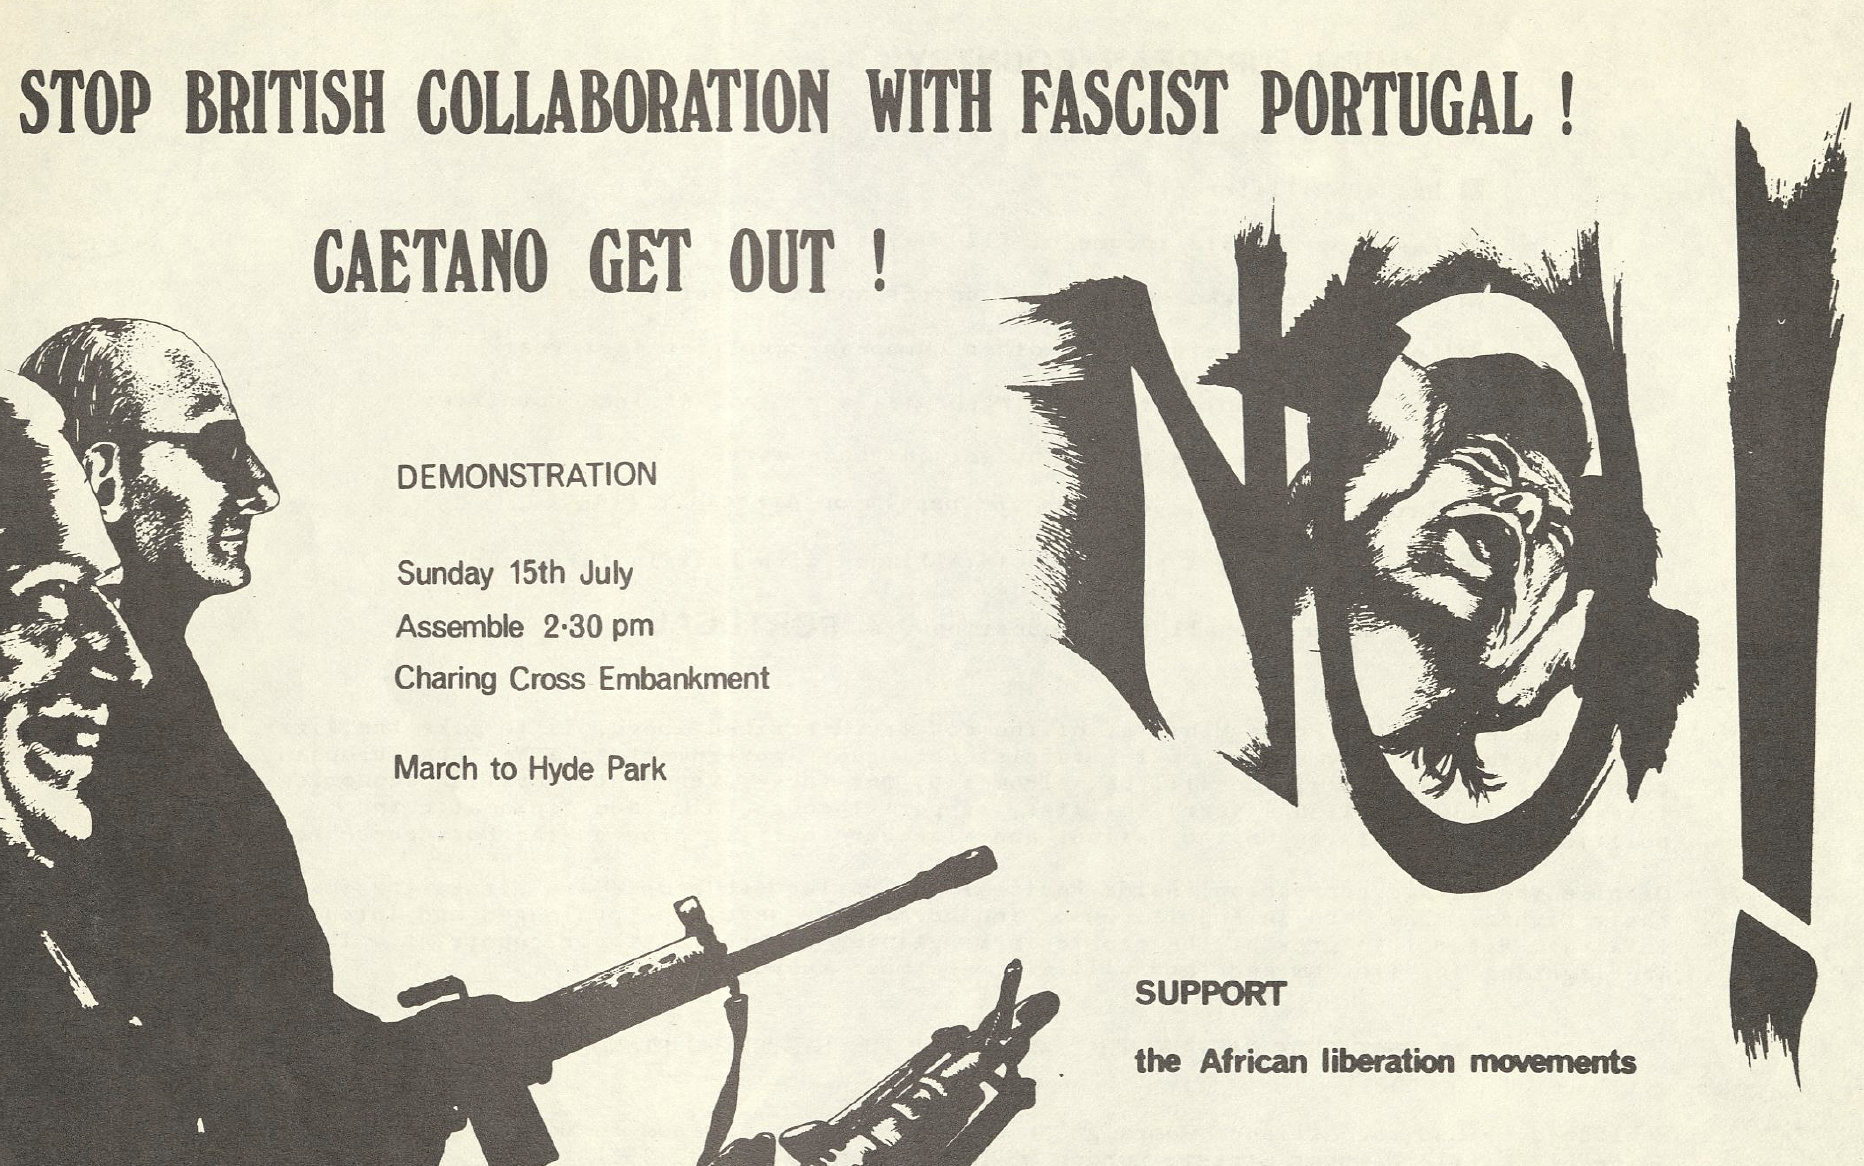 "Stop British collaboraton with fascist Portugal! Caetano get out!"